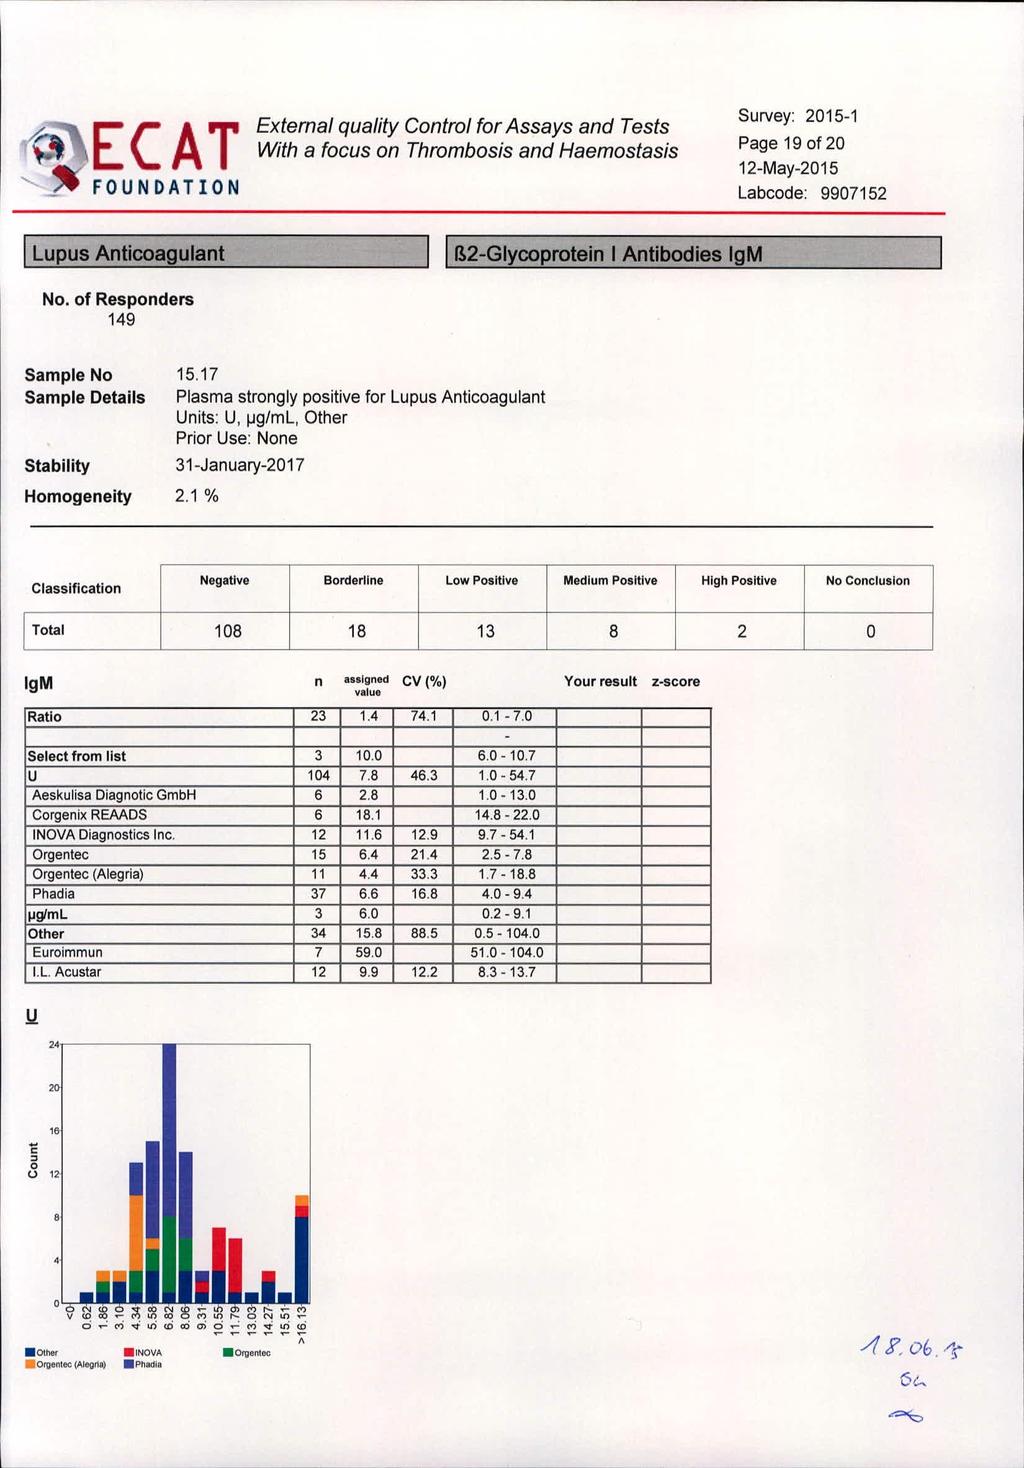 c, o U 12 [(AT Extemal qua/ity Contral for Assays and Tests With a foeus on Thrambosis and Haemostasis Page 19 of 20 I Lupus Anticoagulant I ß2-Glycoprotein I Antibodies IgM No.